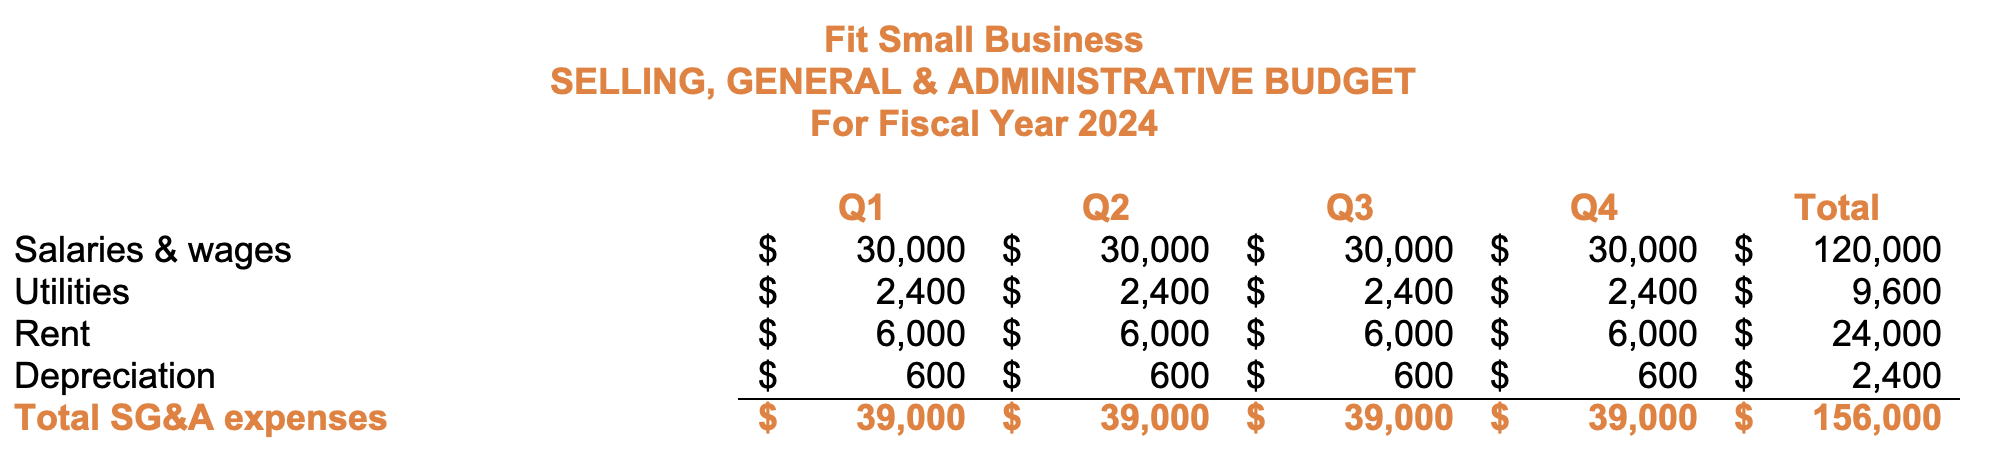 Image showing the sales and administrative (S&A) budget